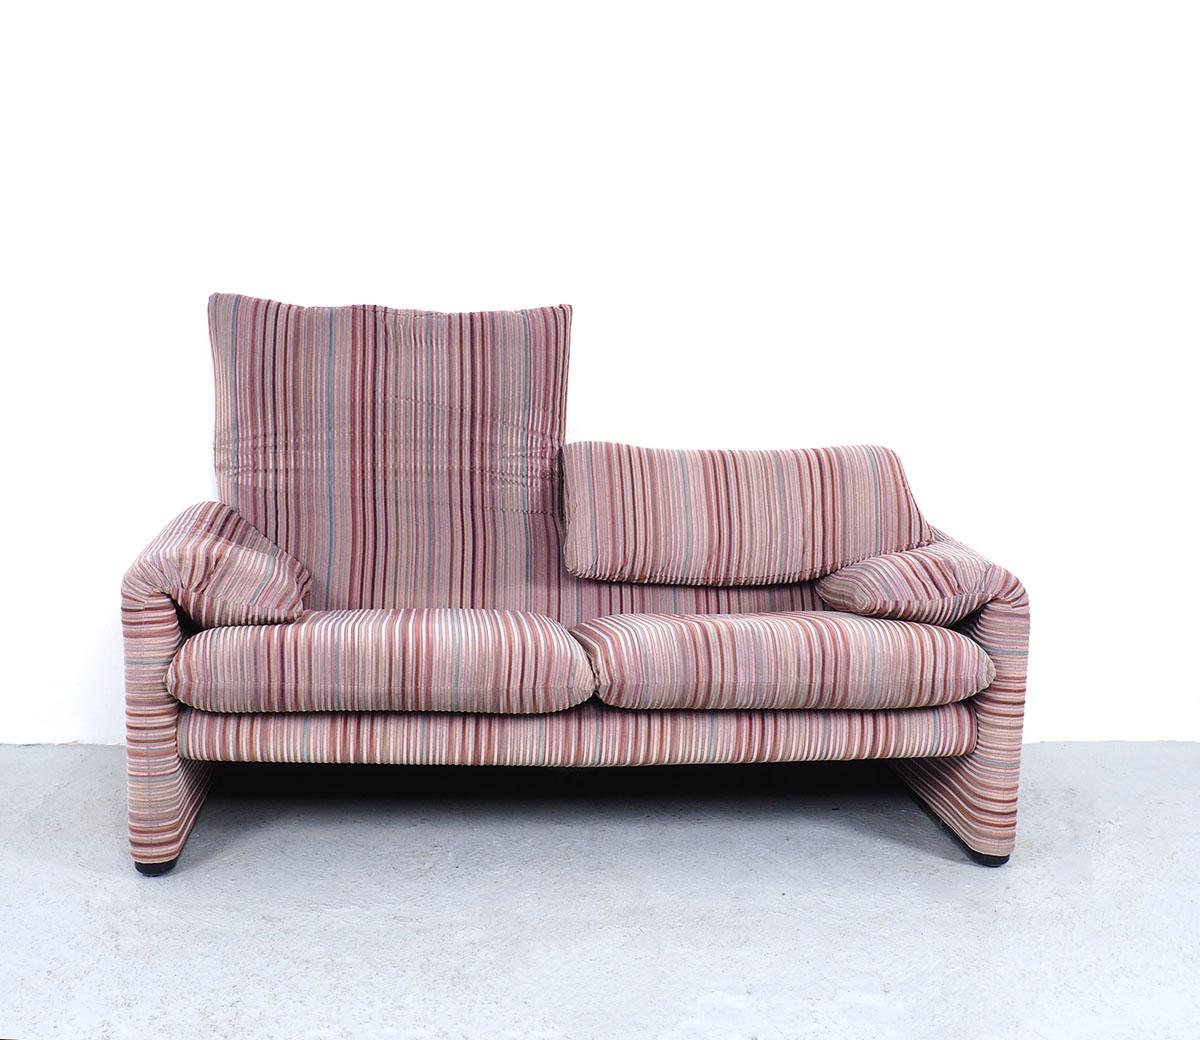 Beautiful italian designer 2-seater sofa designed in 1973.
Designed by Vico Magistretti fo Cassina.

Production period 1990/2000.

The sofa is covered with a soft velvet fabric with colorful striped decor in different soft shades pink, green,